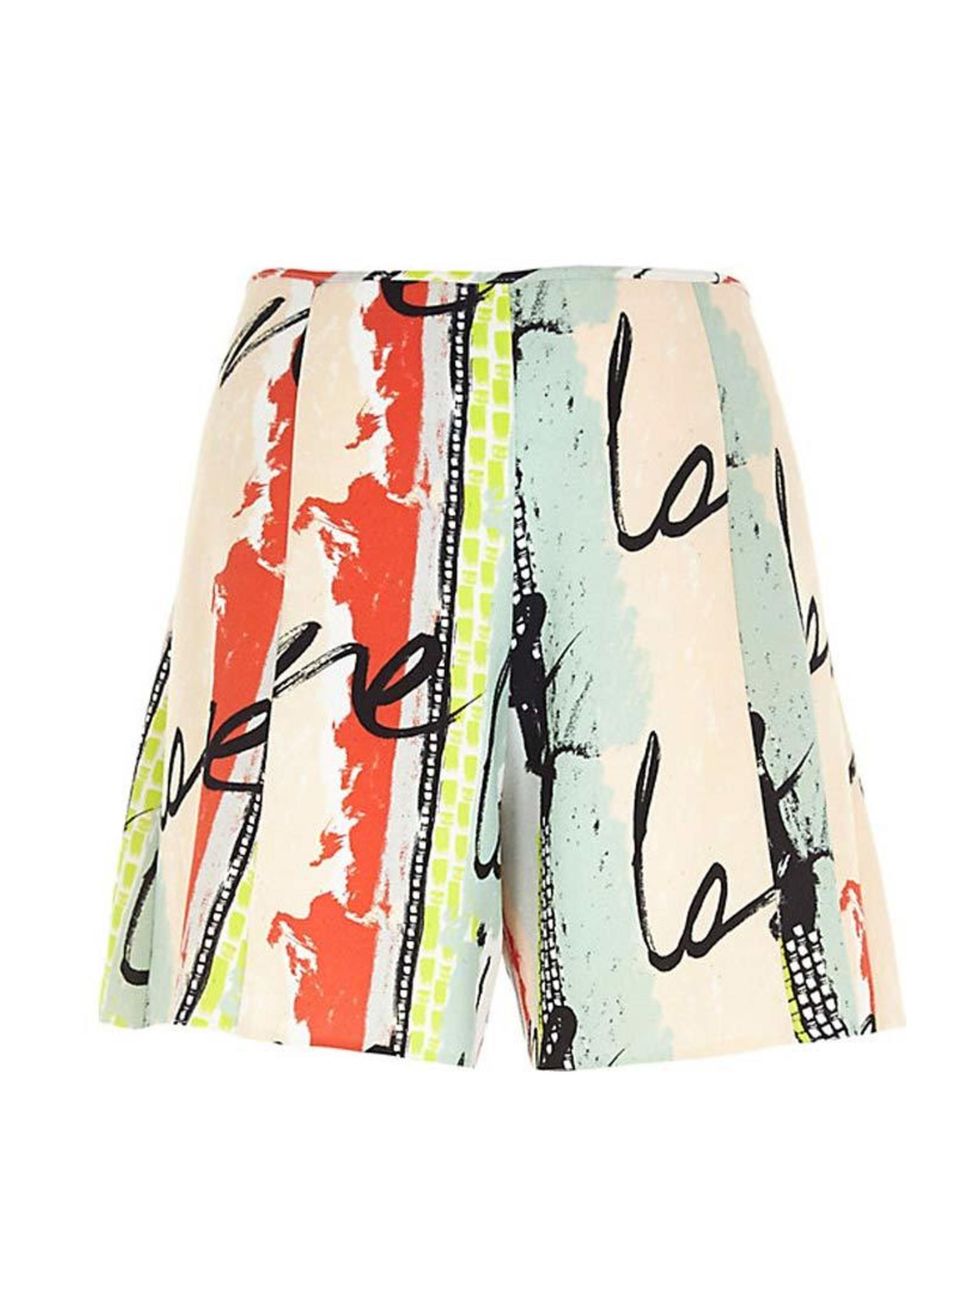 <p><span style="line-height:1.6">Wear with black tights and a chunky-knit jumper.</span></p>

<p><a href="http://www.riverisland.com/women/shorts/smart-shorts/Green-paint-splash-high-waist-shorts-665223" target="_blank">River Island</a> shorts, £30</p>